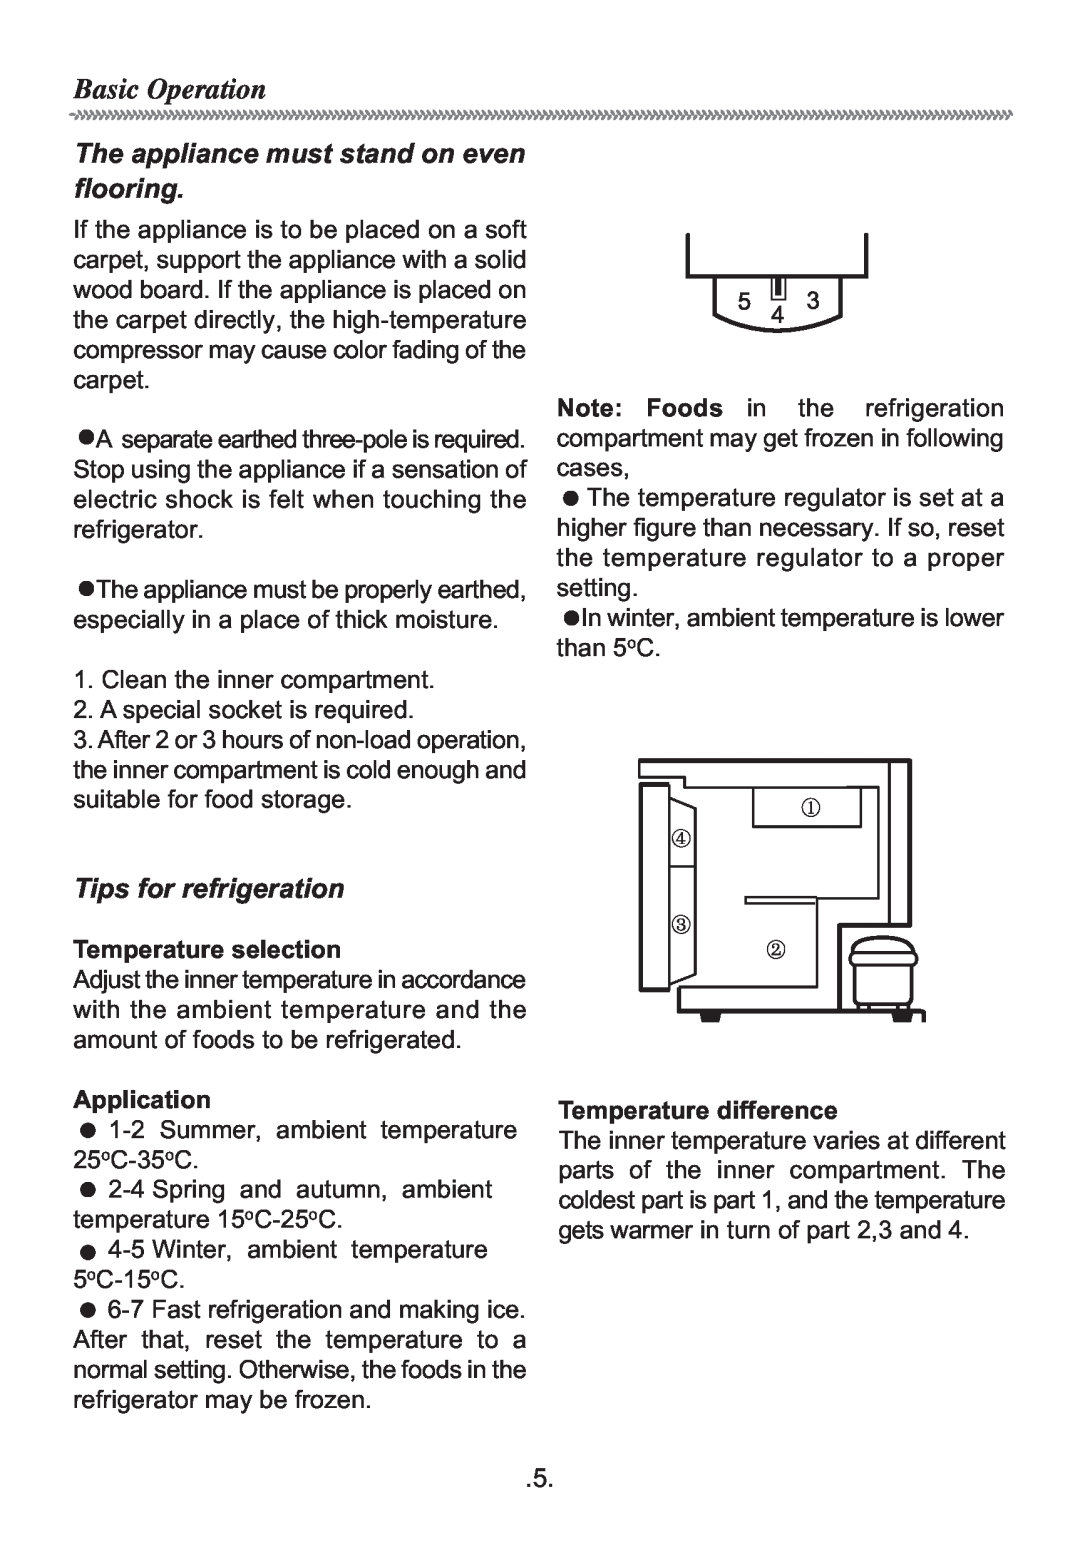 Haier HR-126-1 Basic Operation, The appliance must stand on even flooring, Tips for refrigeration, Temperature selection 